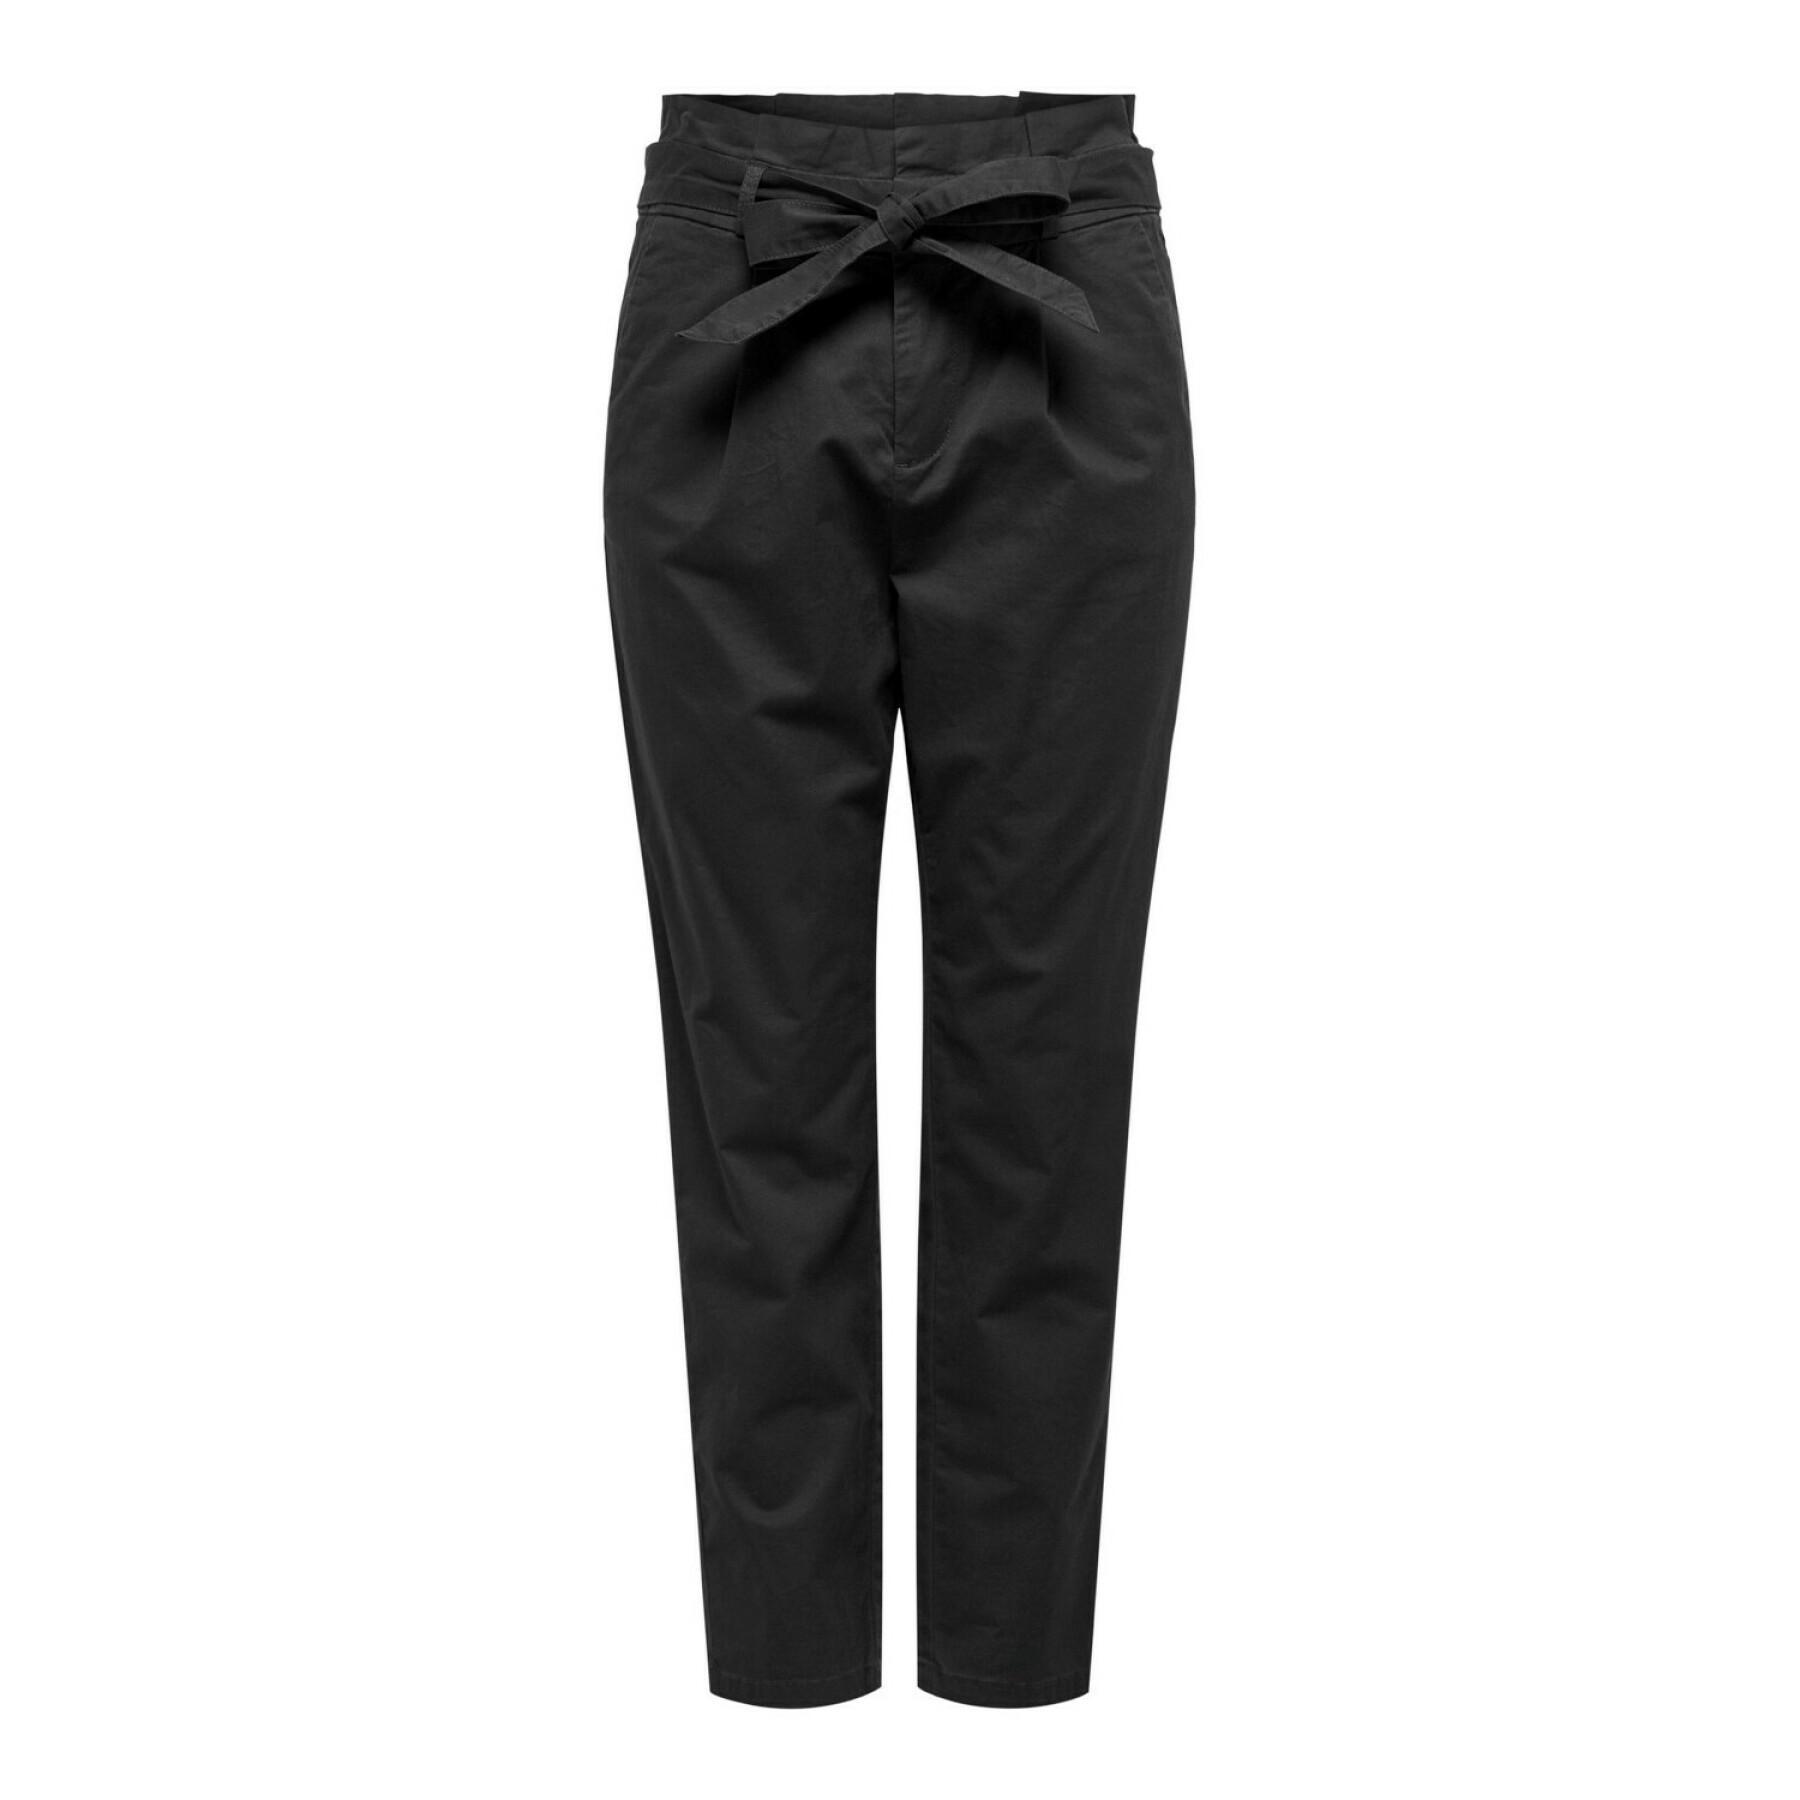 Women's trousers Only onlpoptrash life